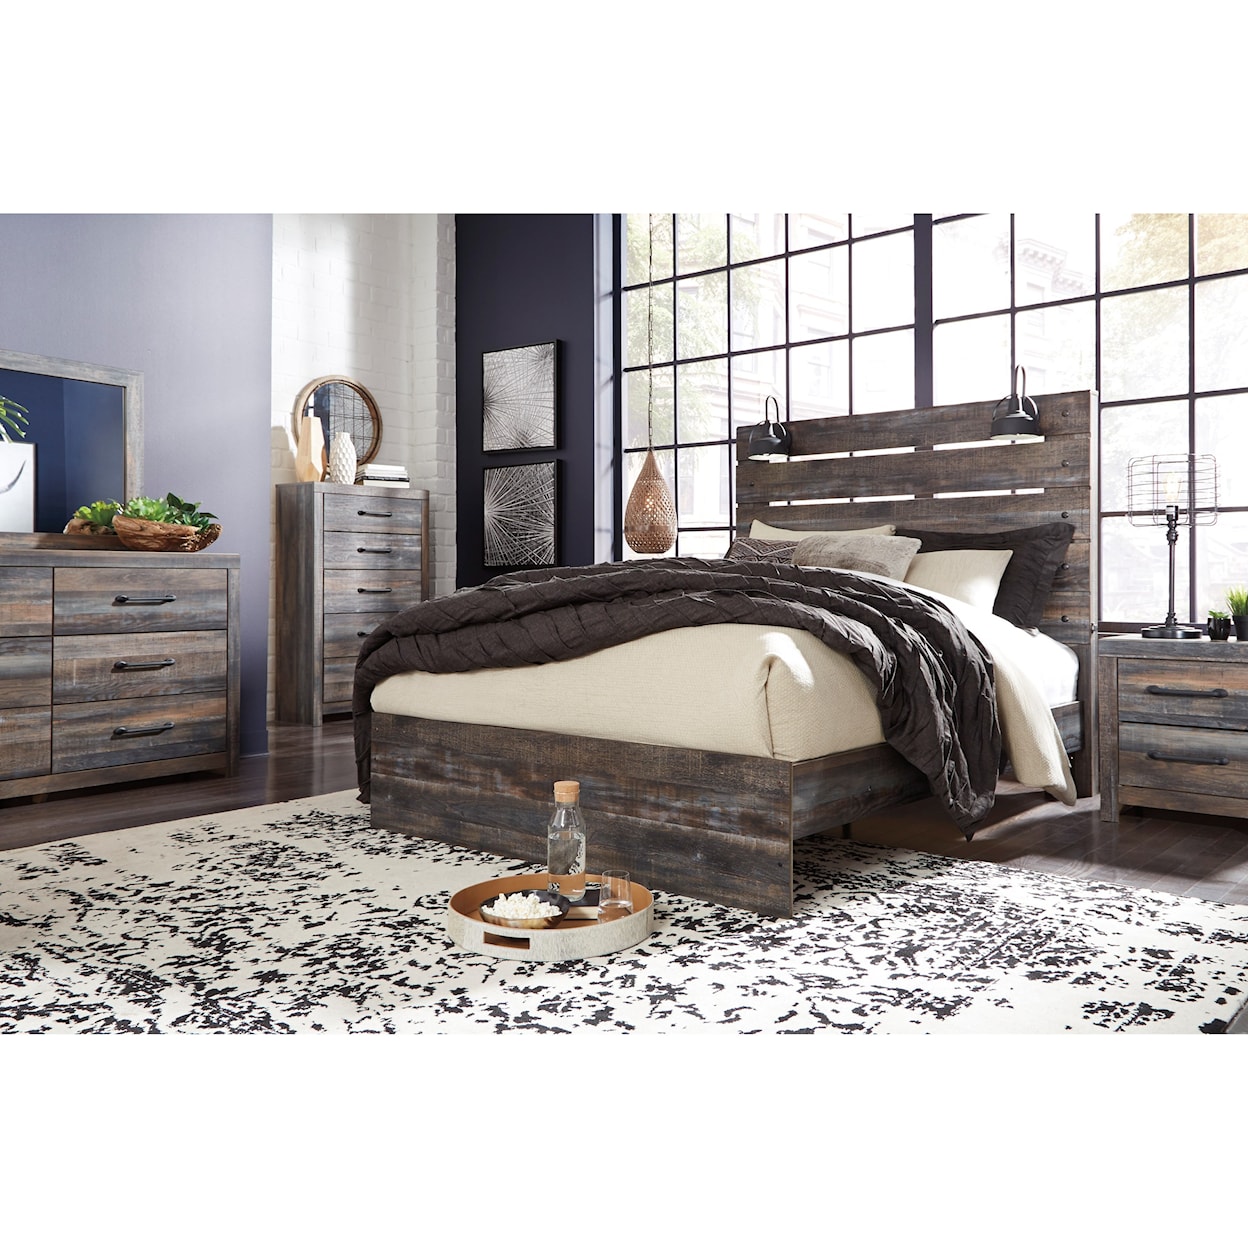 Signature Design by Ashley Drystan Queen 7-PC Bedroom Group